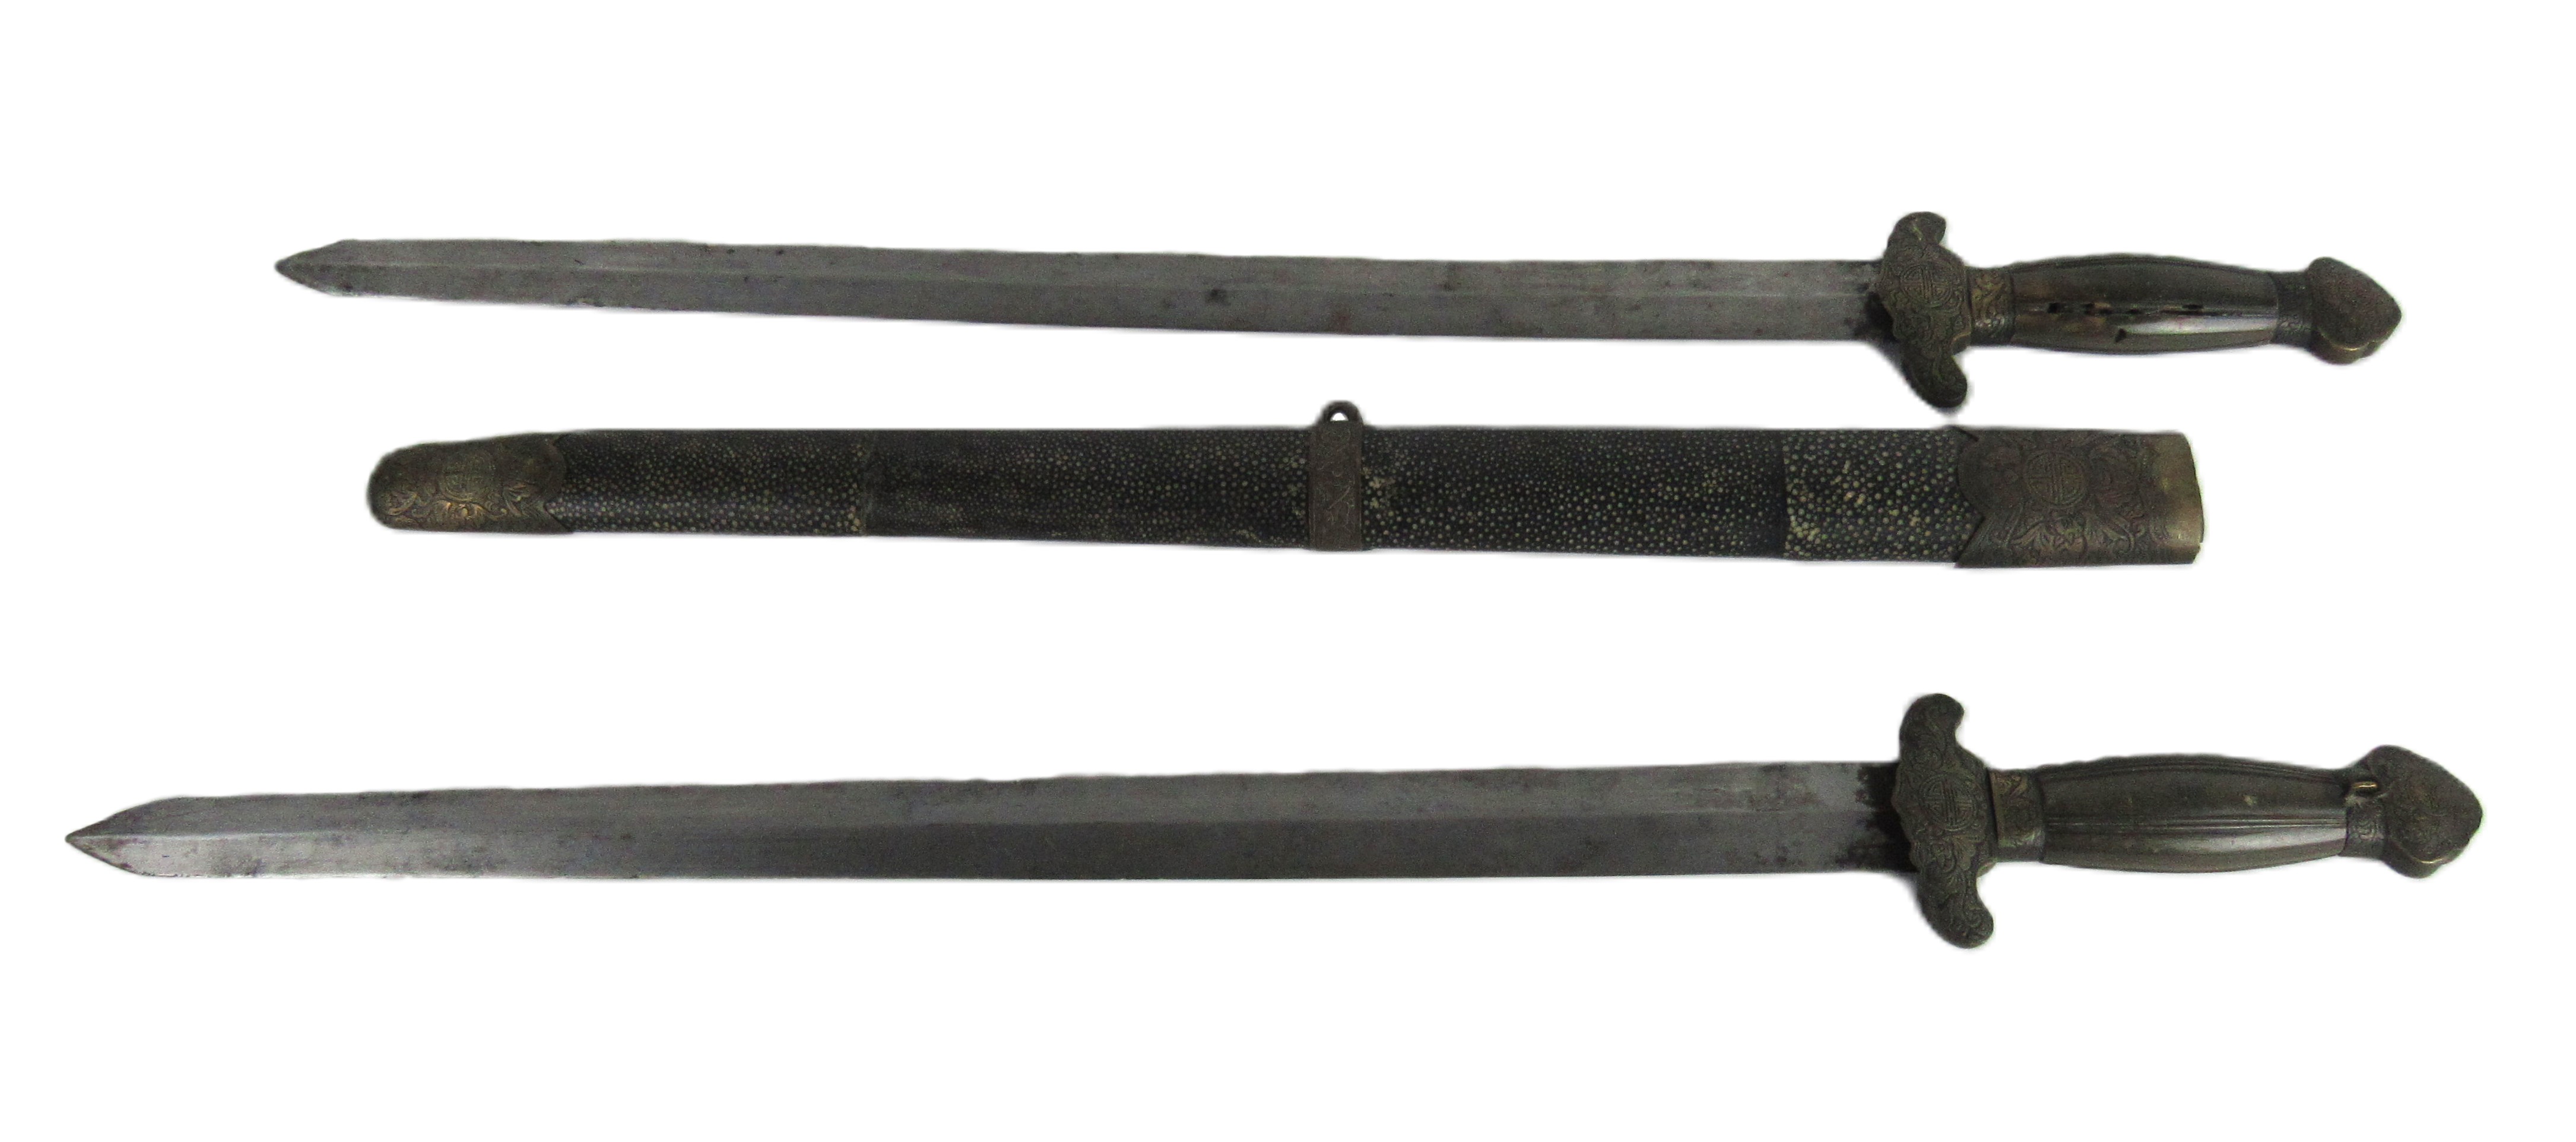 Militaria: A 19th Century Chinese double 'Shuang Jian' Sword, the shaped half handles with - Image 2 of 2